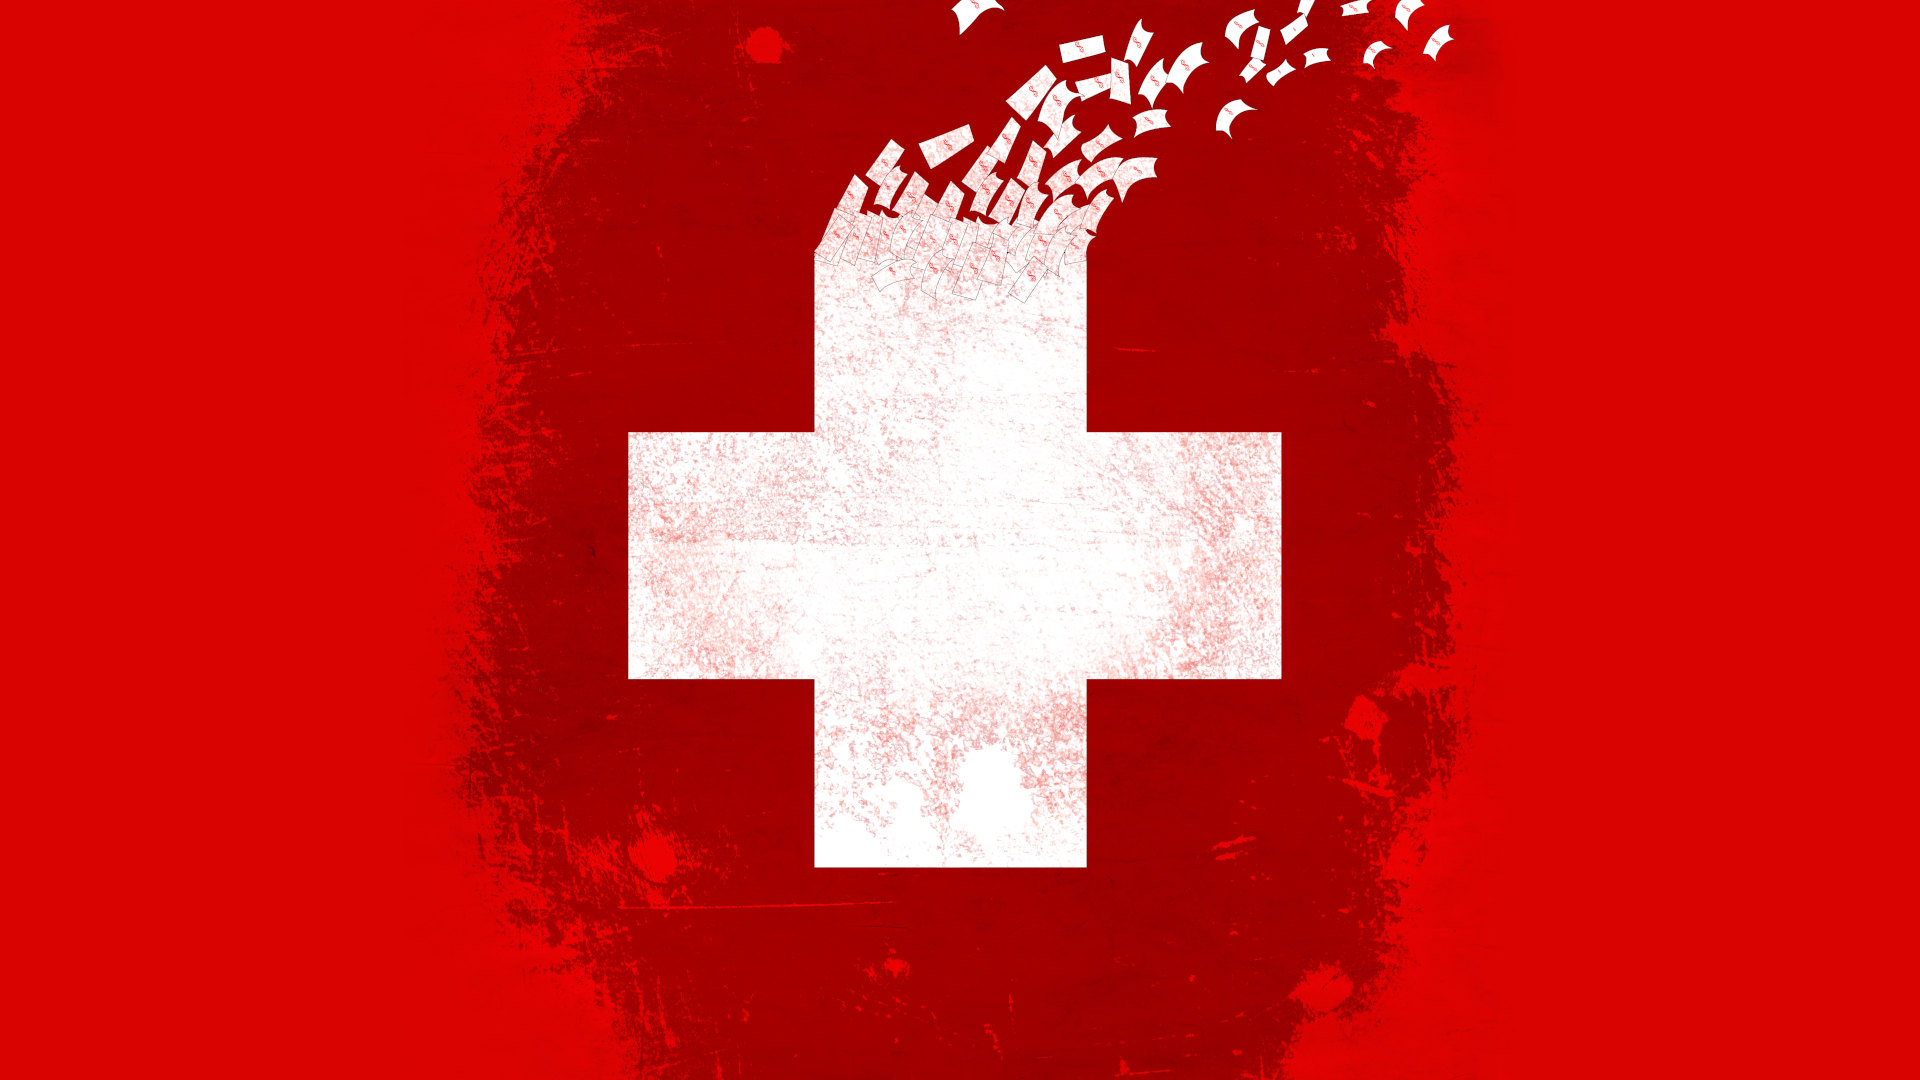 white health care symbol on a red background dissolves into dollar bills.